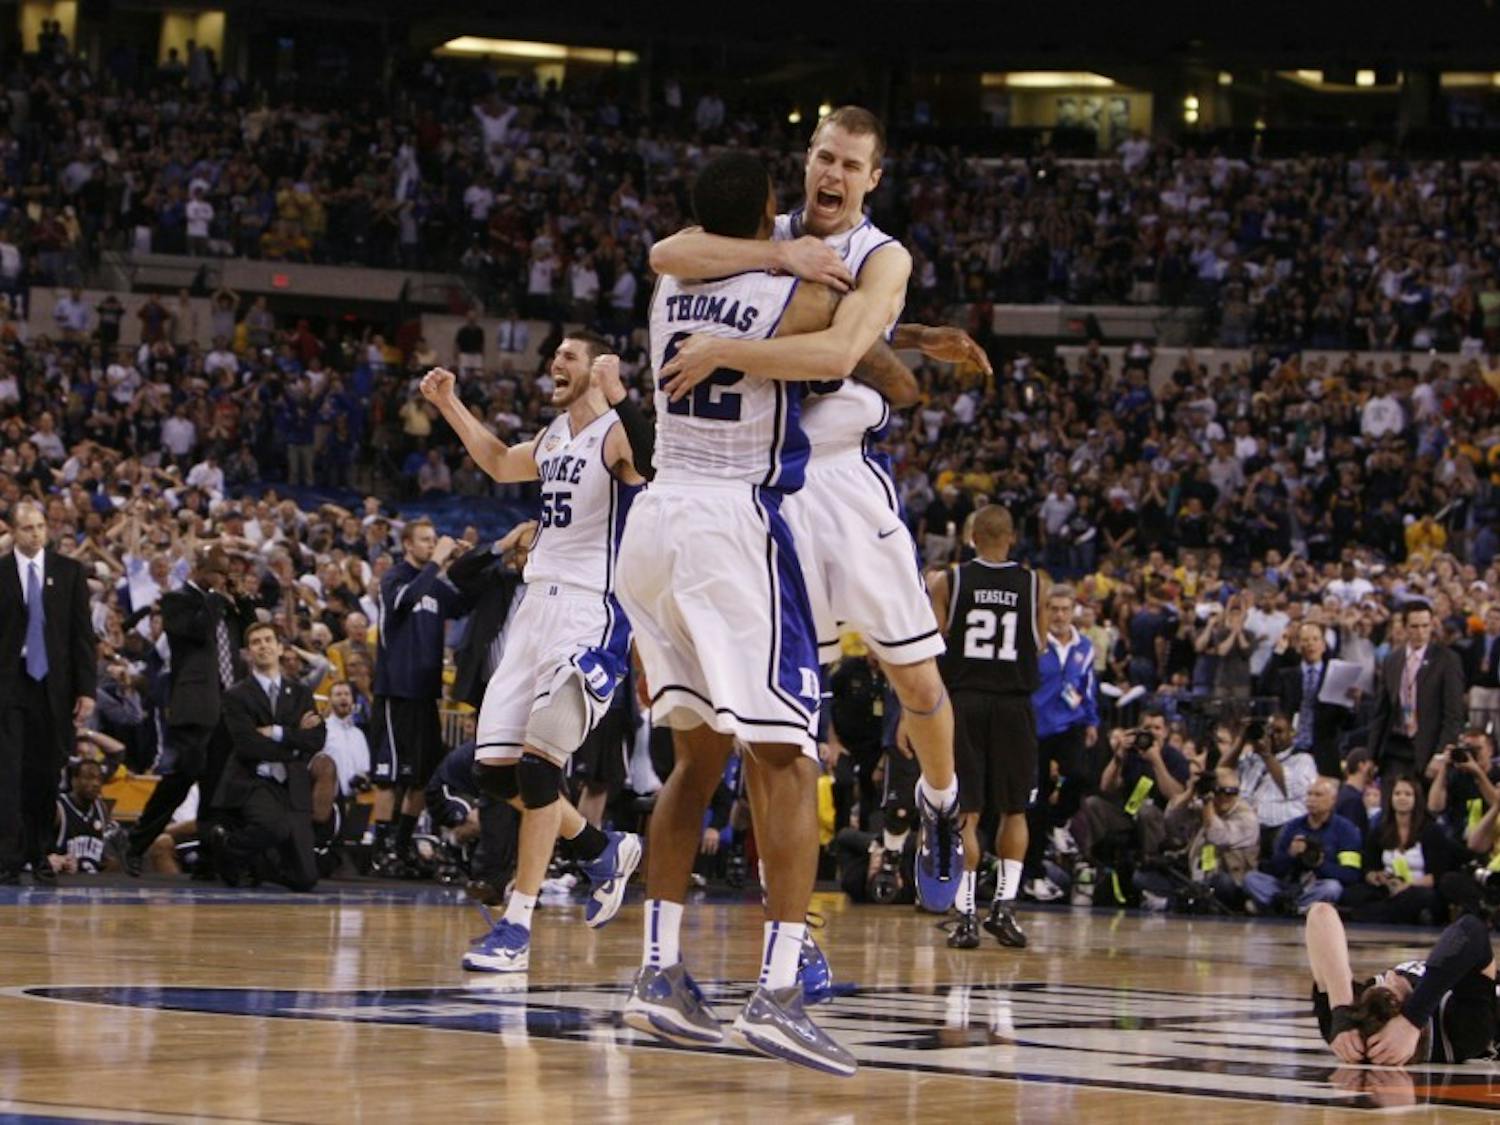 Duke has captured three national championships since the turn of the century.